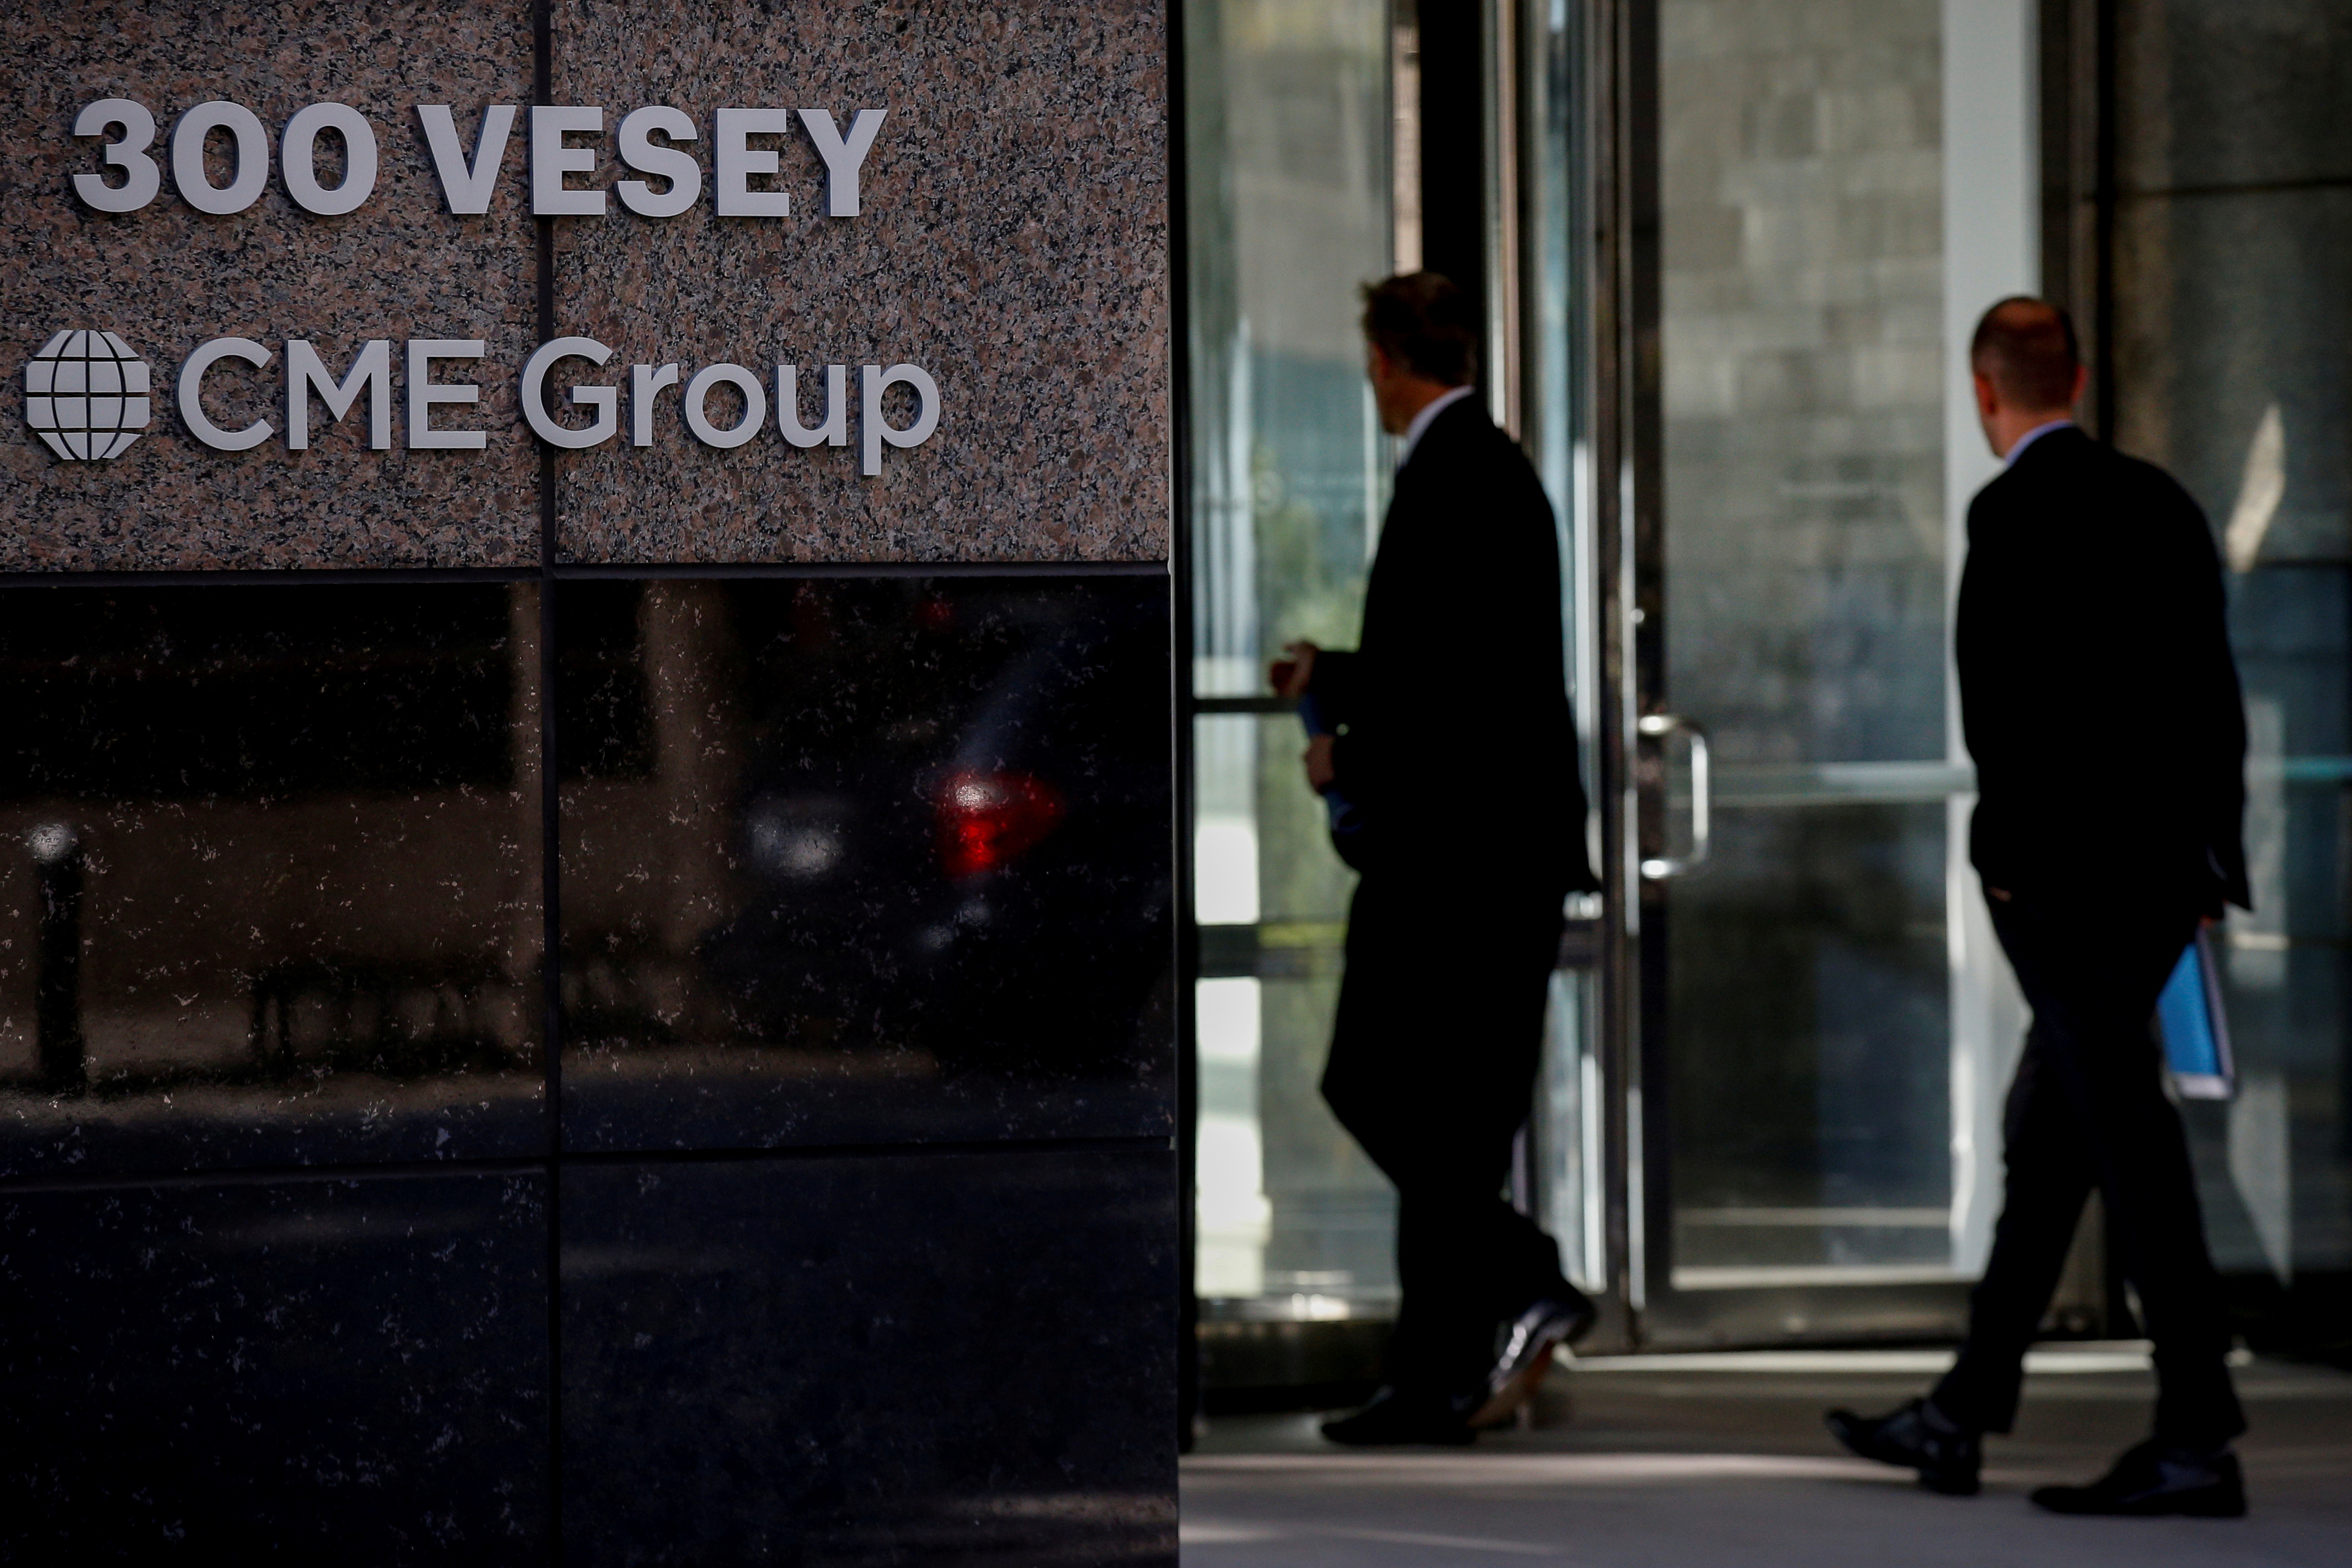 Men enter the CME Group offices in New York